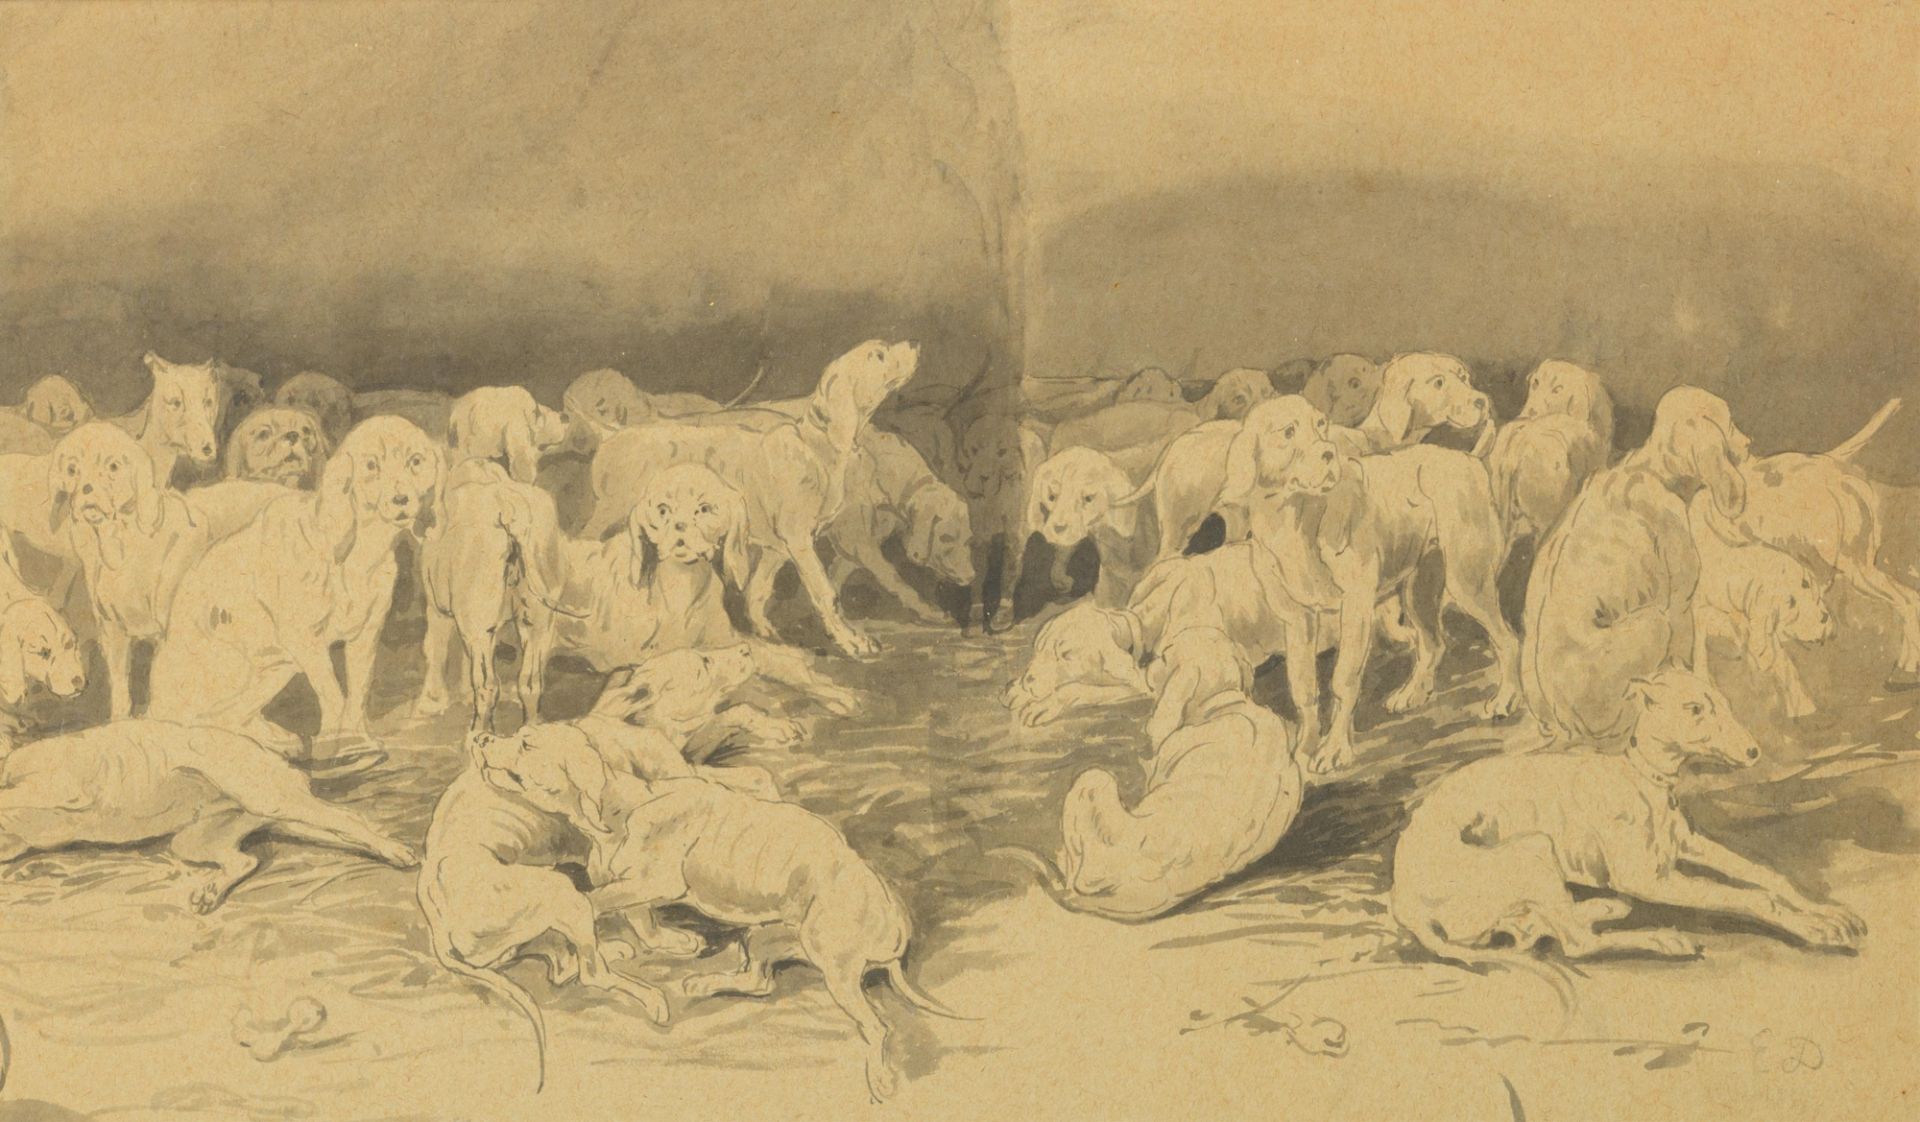 Monogrammed E.D., a pack of dogs, three washed drawings, 21 x 31 - 35 cm - Image 7 of 12